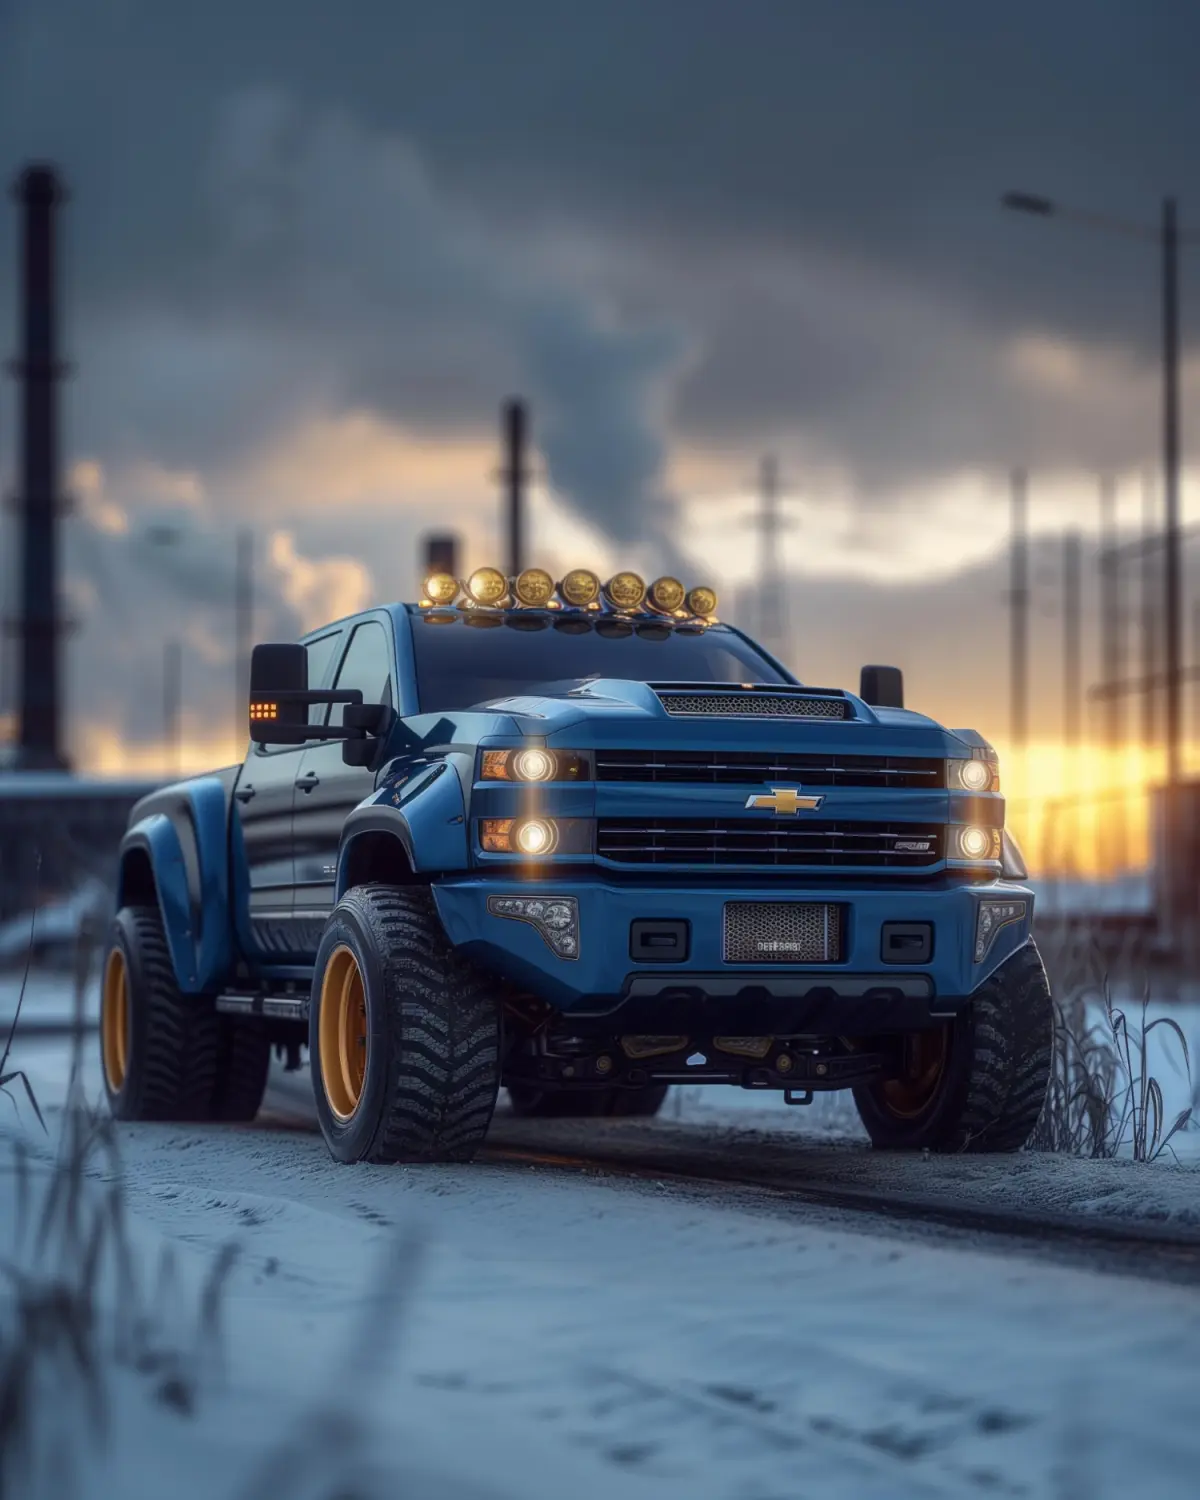 Custom-built Chevy Dually designed for maximum towing capability in an industrial setting